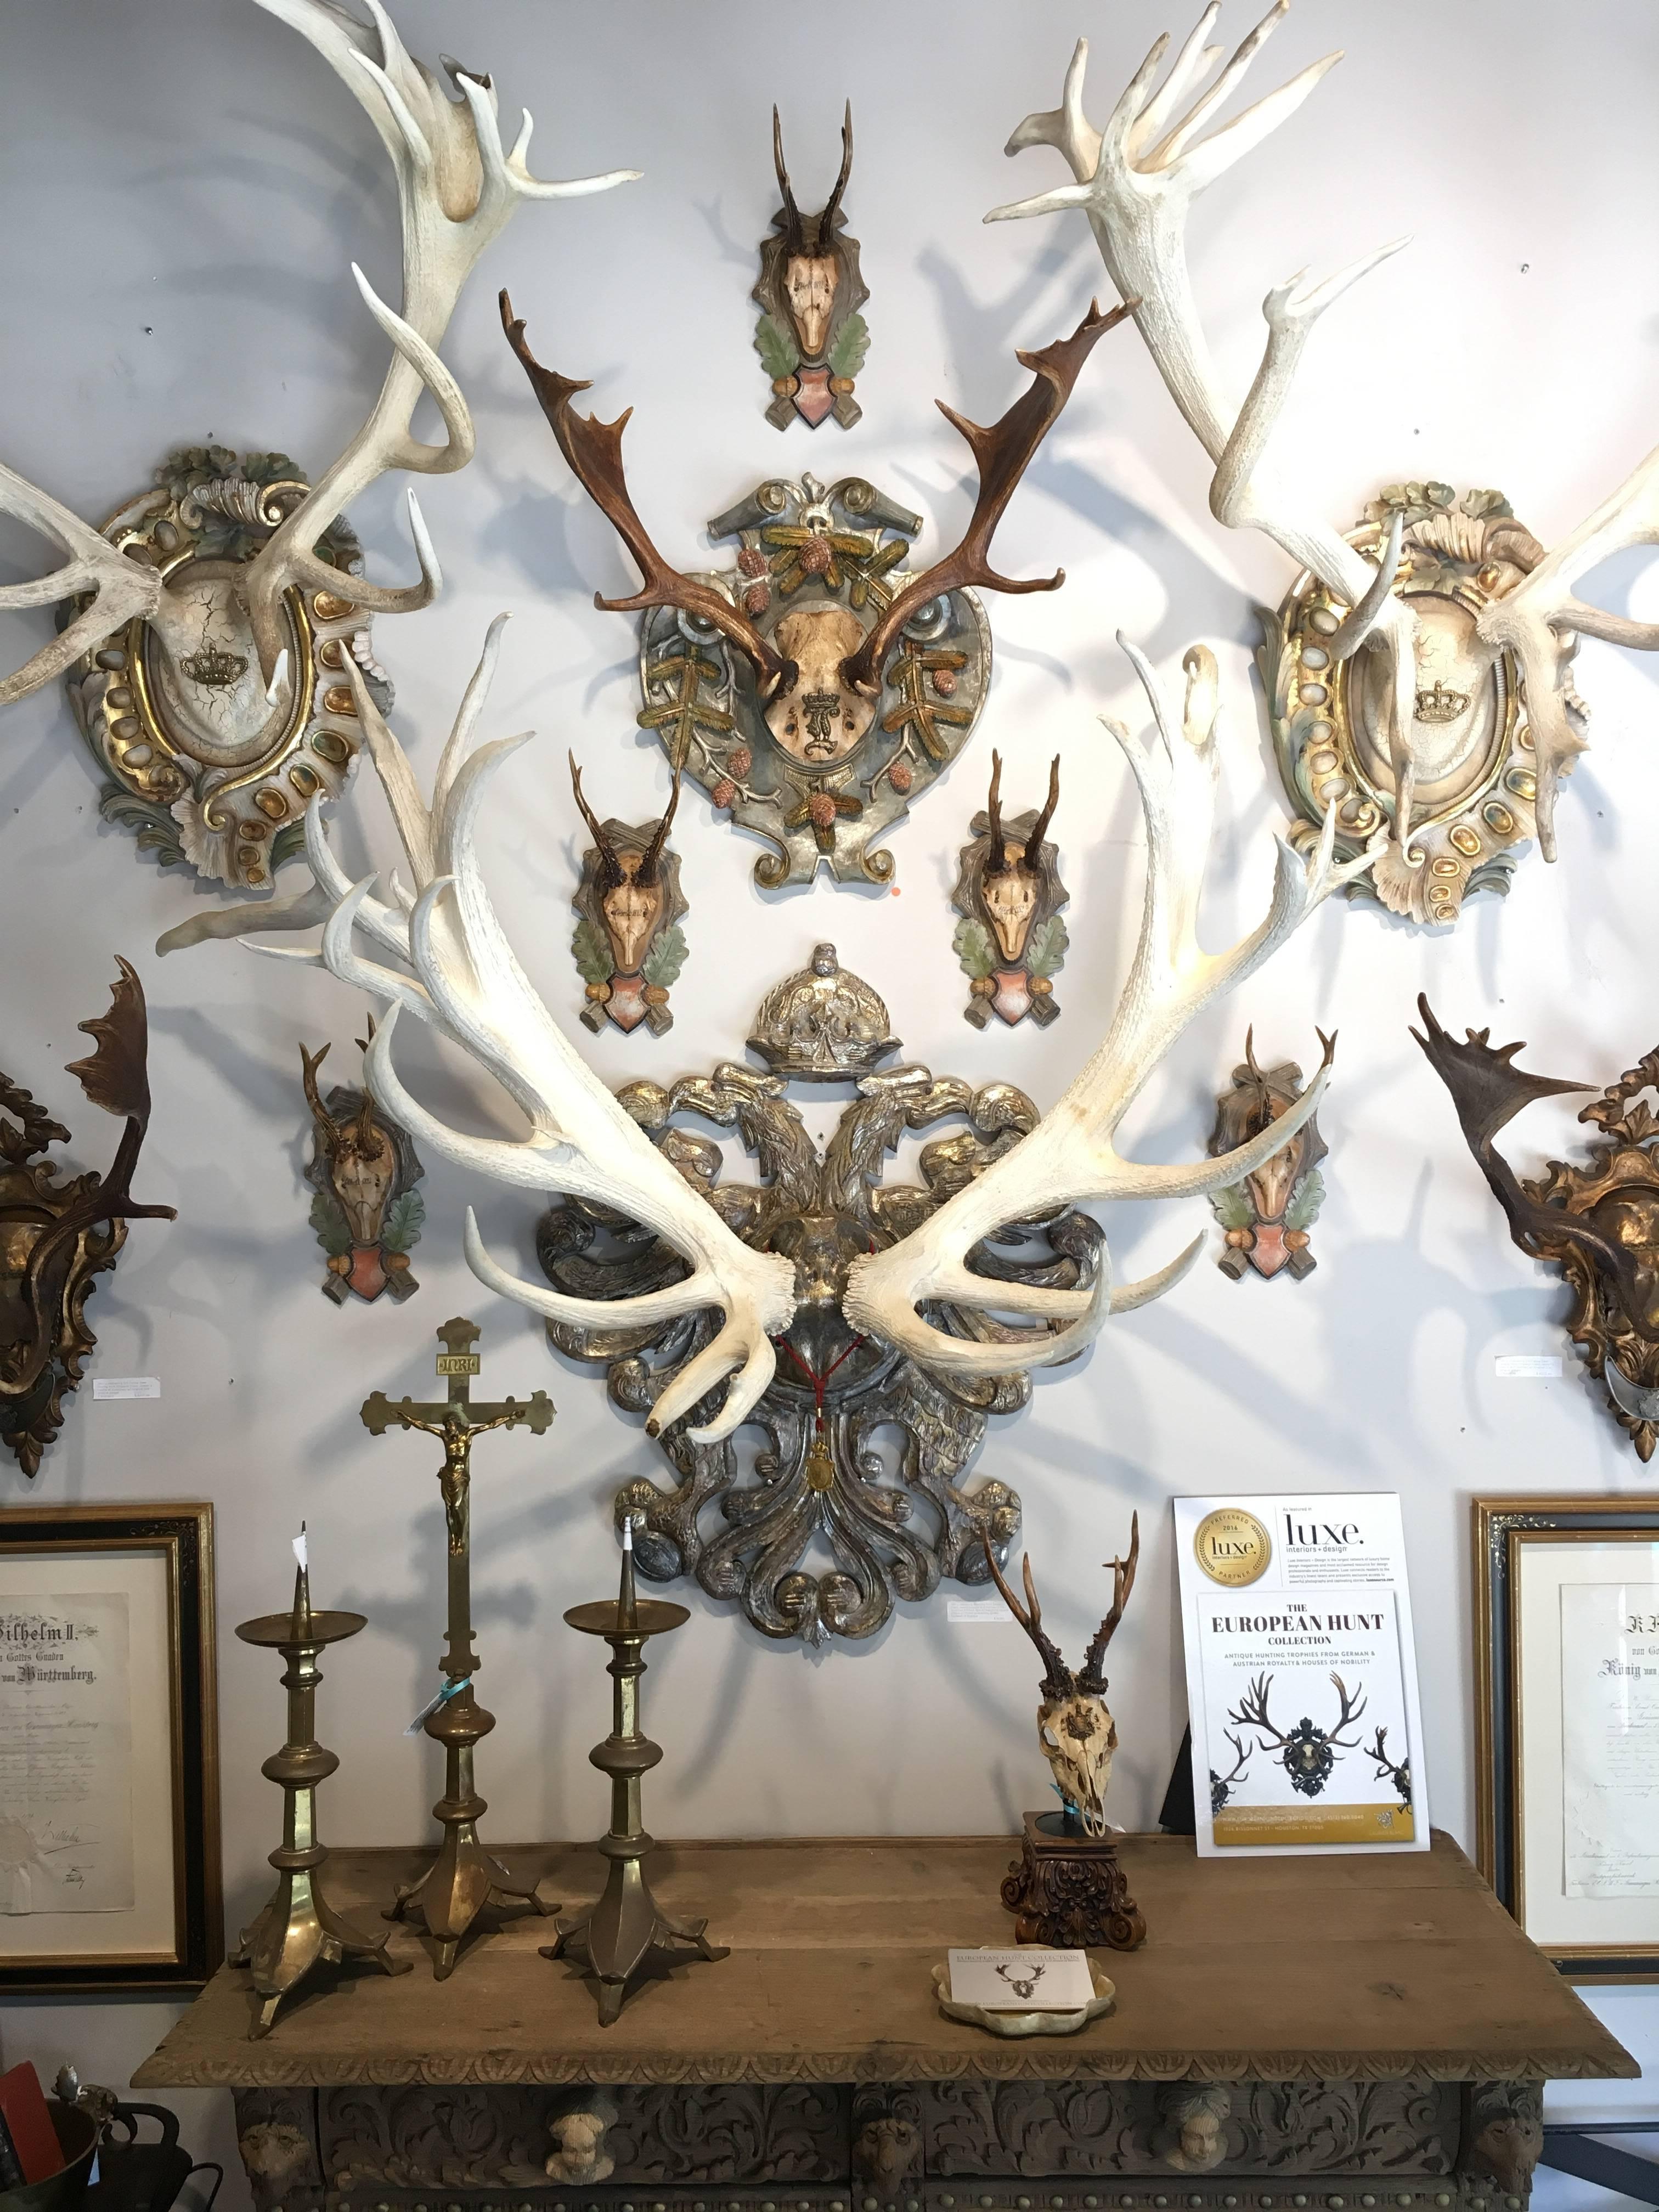 19th Century Habsburg Red Stag Trophy from Franz Joseph's Castle at Eckartsau 3